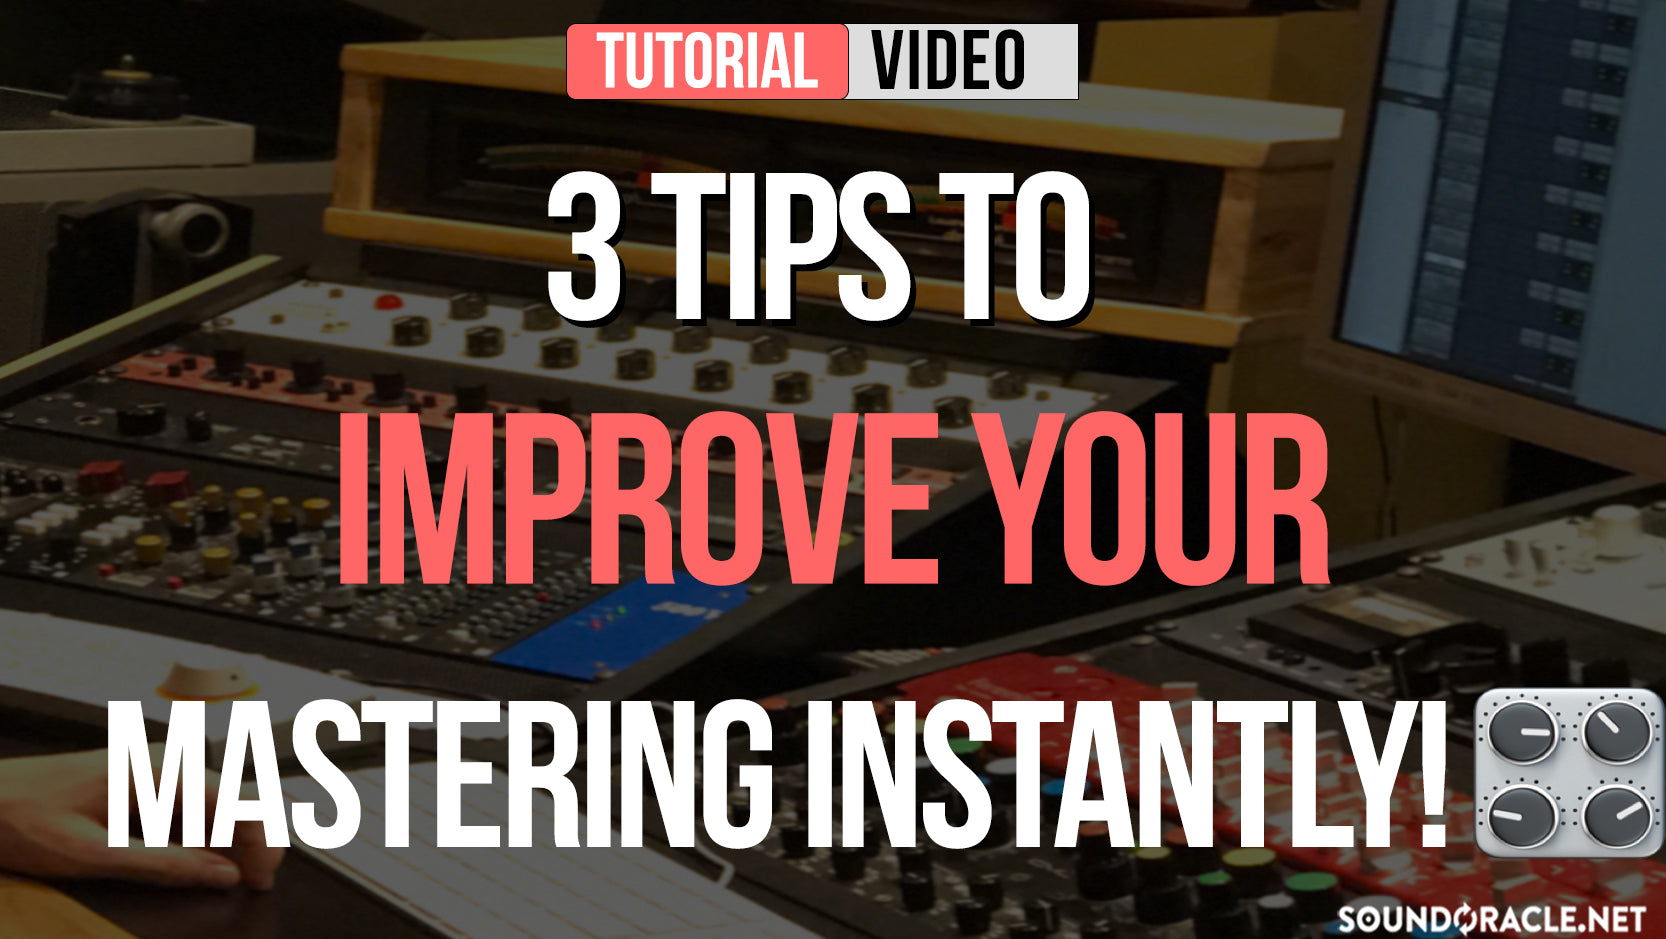 3 Tips To Improve Your Mastering Instantly!